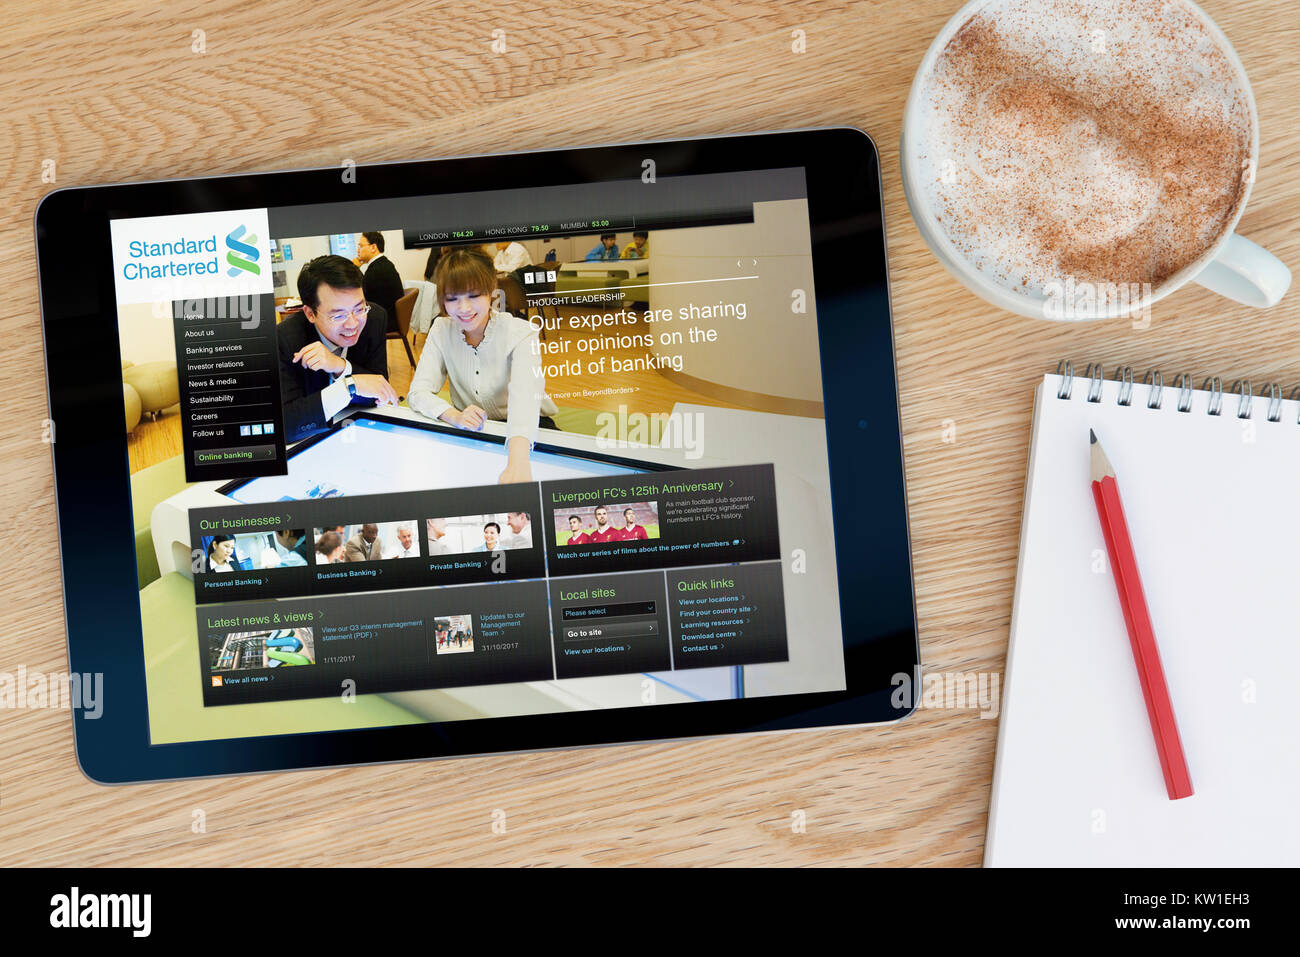 The Standard Chartered website on an iPad tablet device, resting on a wooden table beside a notepad, pencil and cup of coffee (Editorial only) Stock Photo